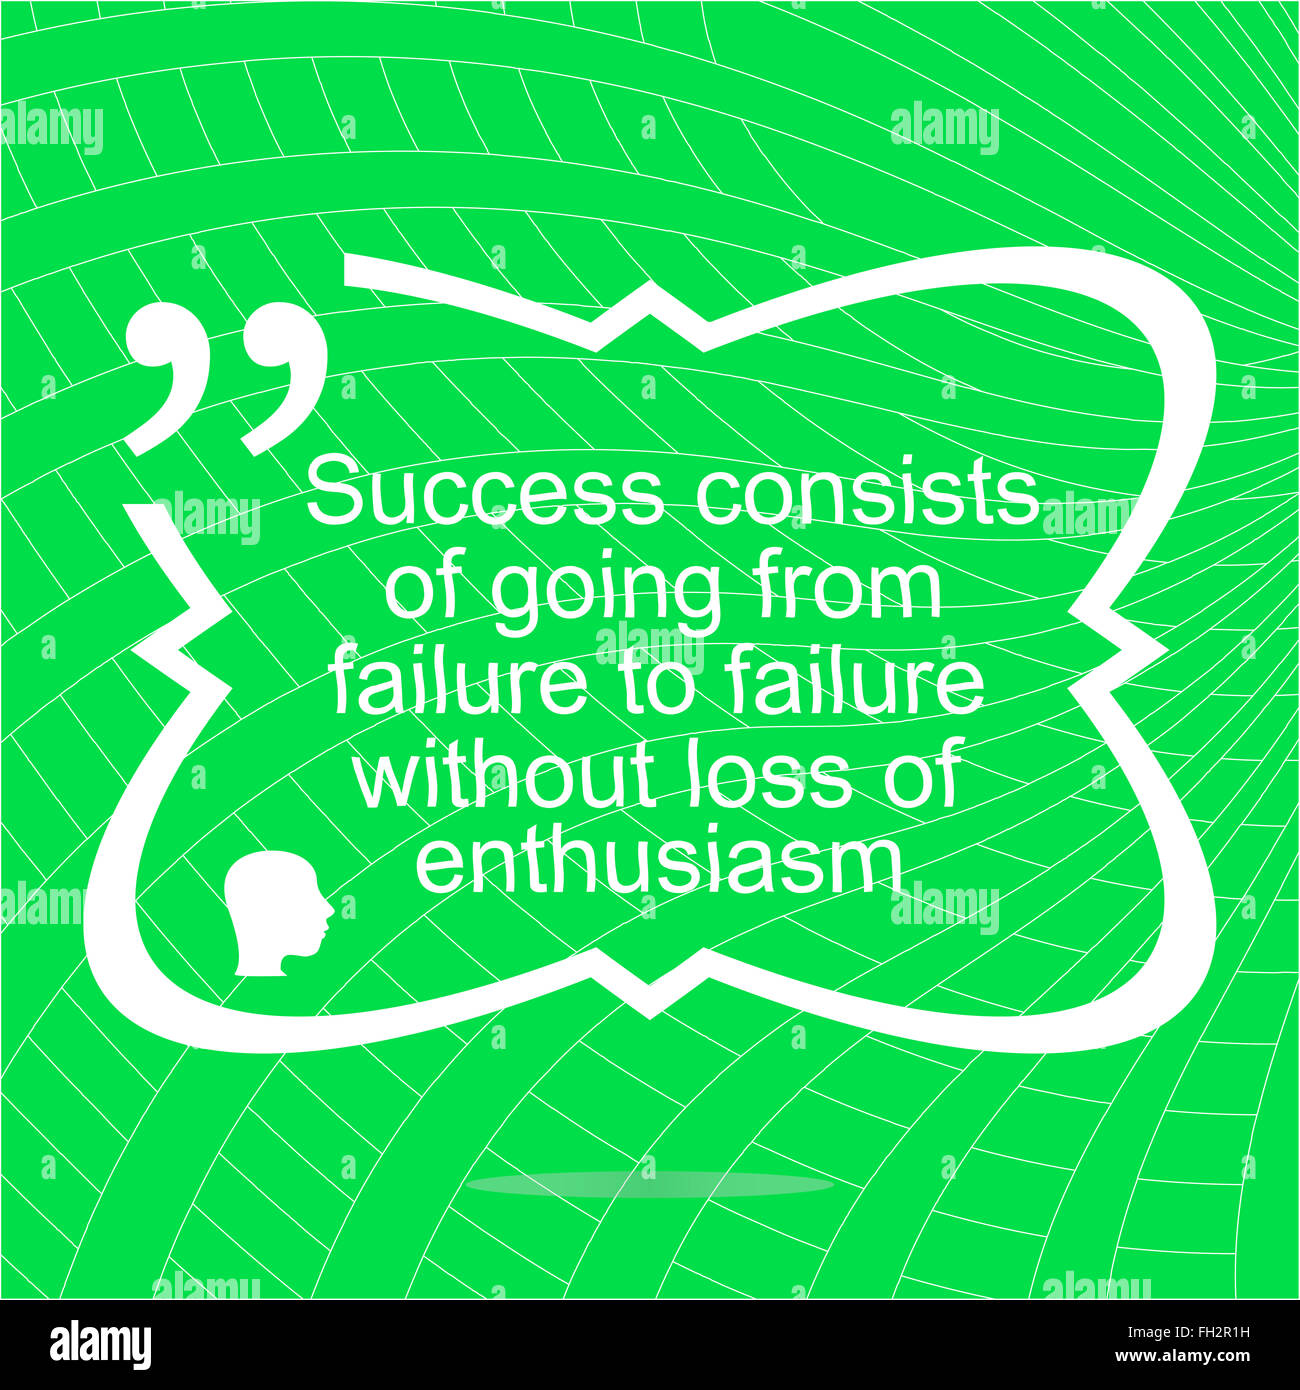 Inspirational motivational quote. Success consists of going from failure to failure without loss of enthusiasm. Simple trendy de Stock Photo